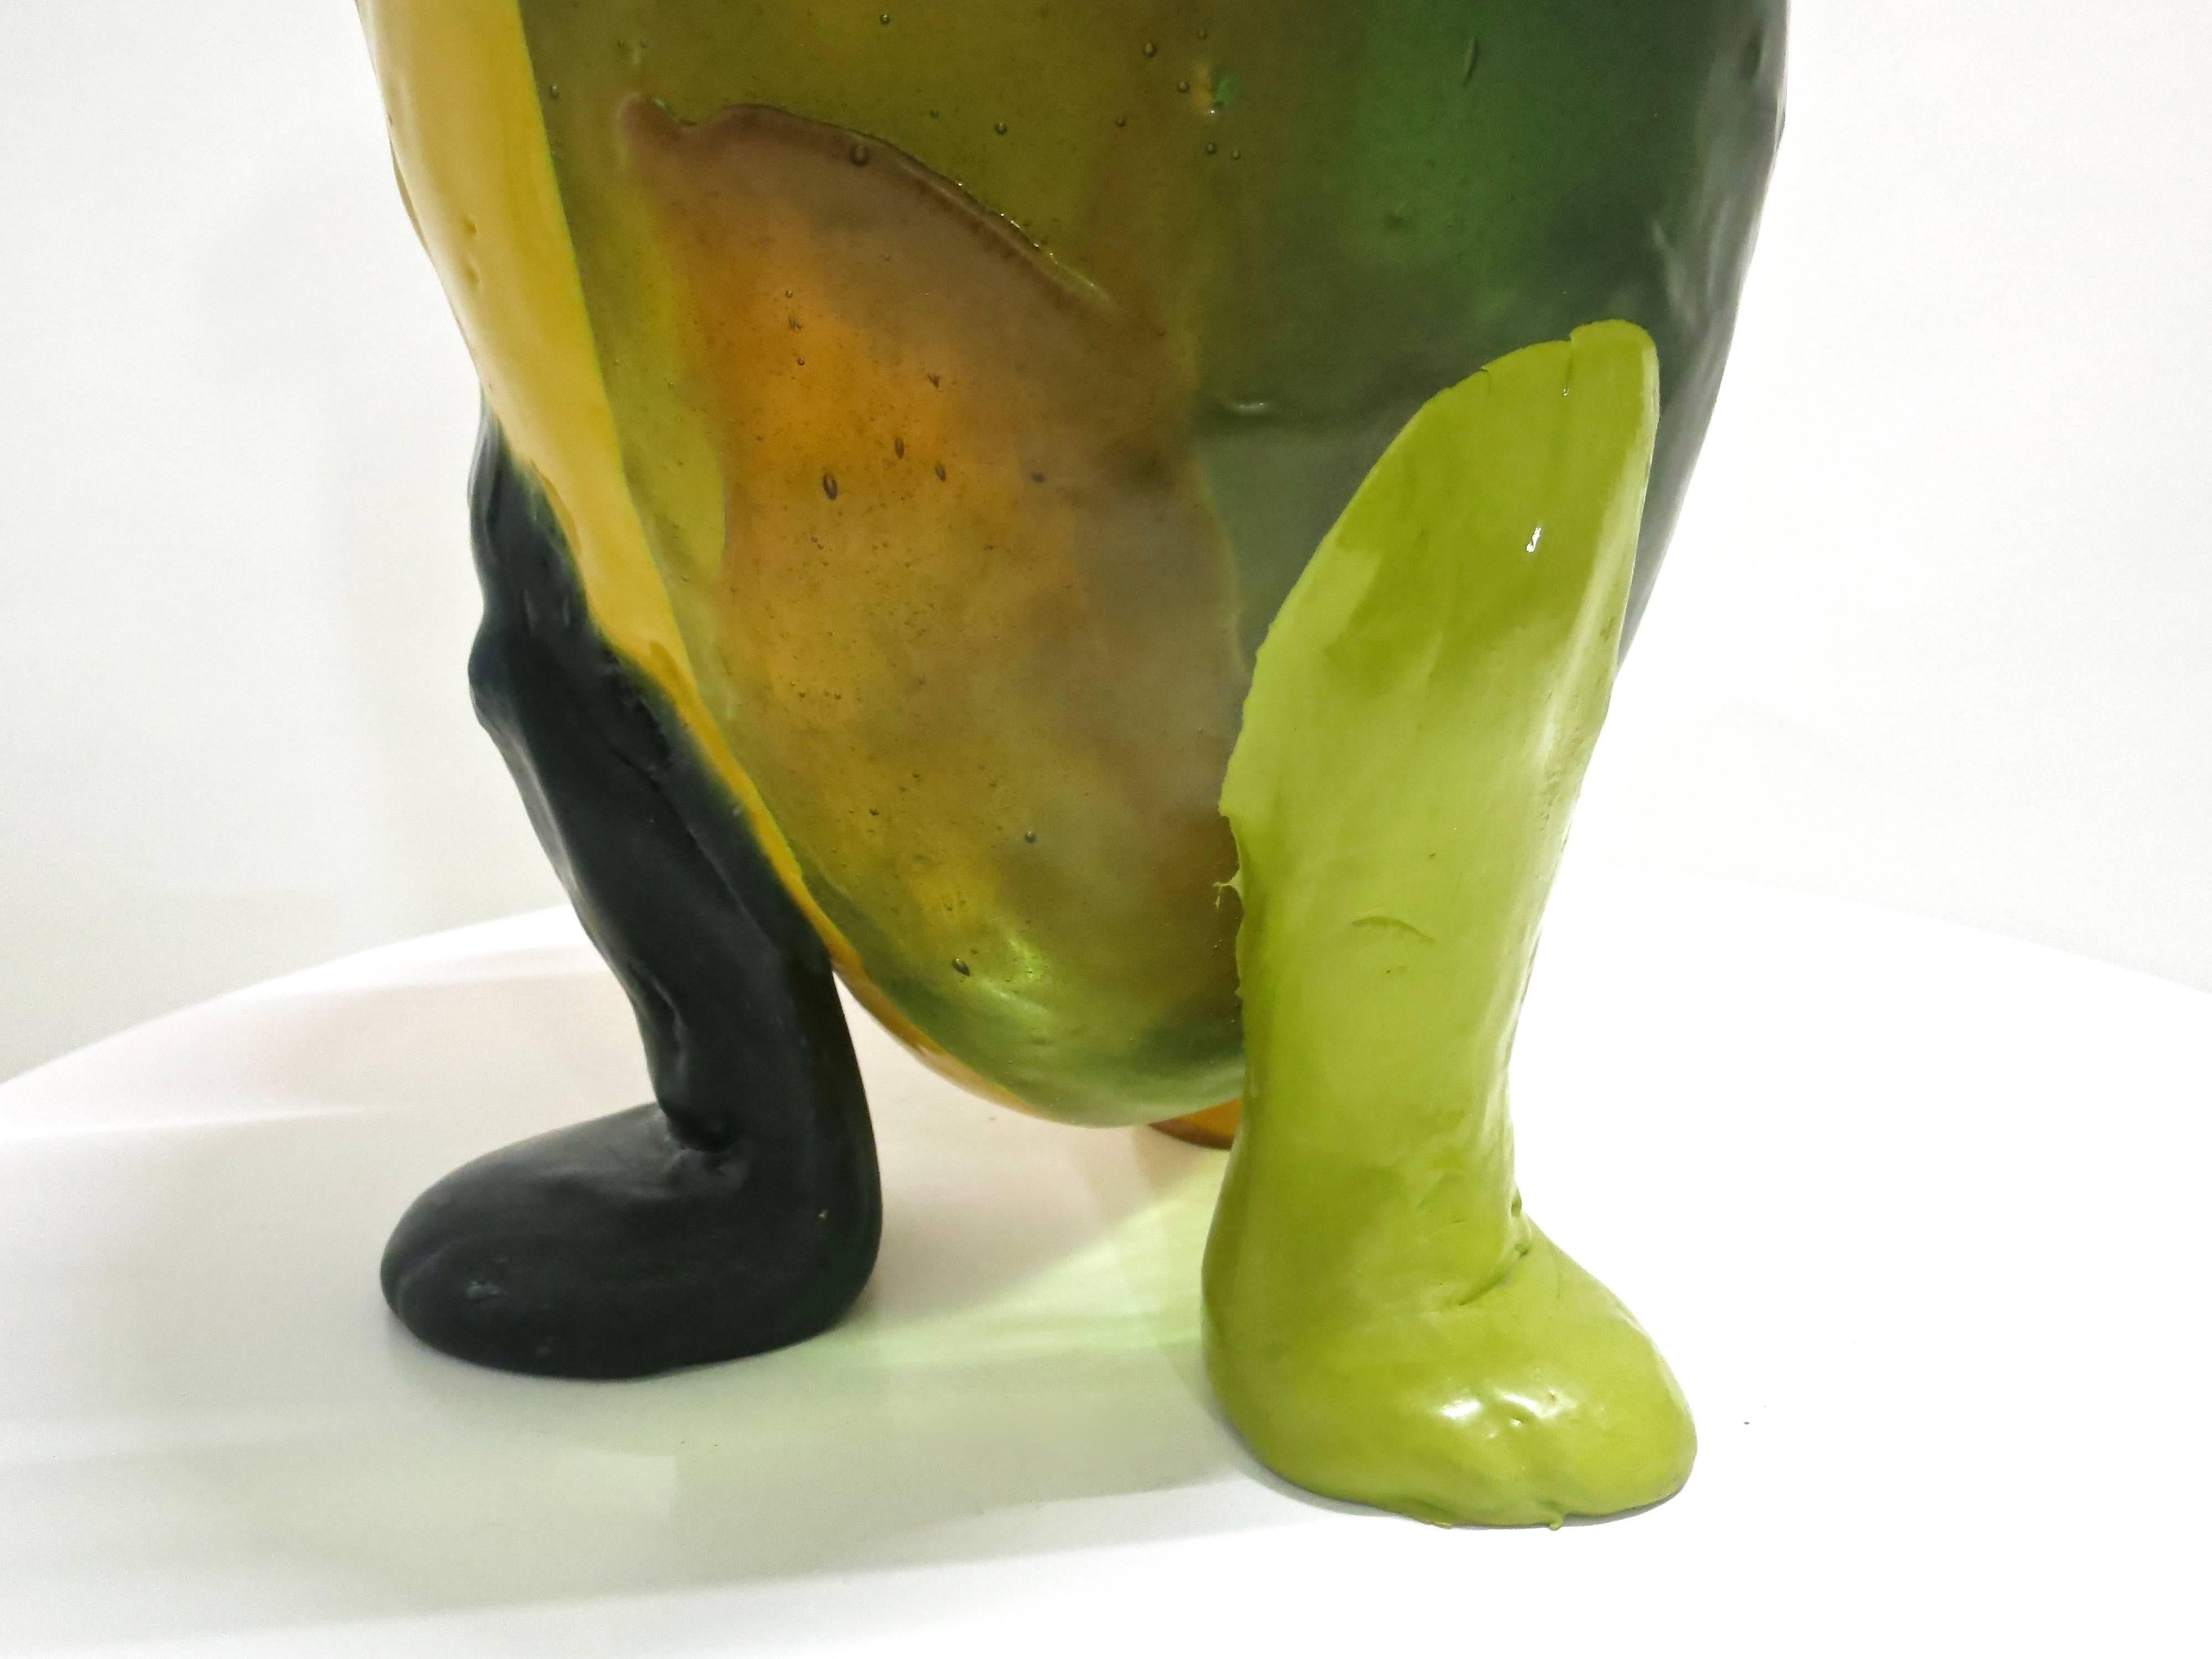 American Amazonia Vase by Artist Gaetano Pesce, Fish Design, Purchased in 1990's NYC For Sale